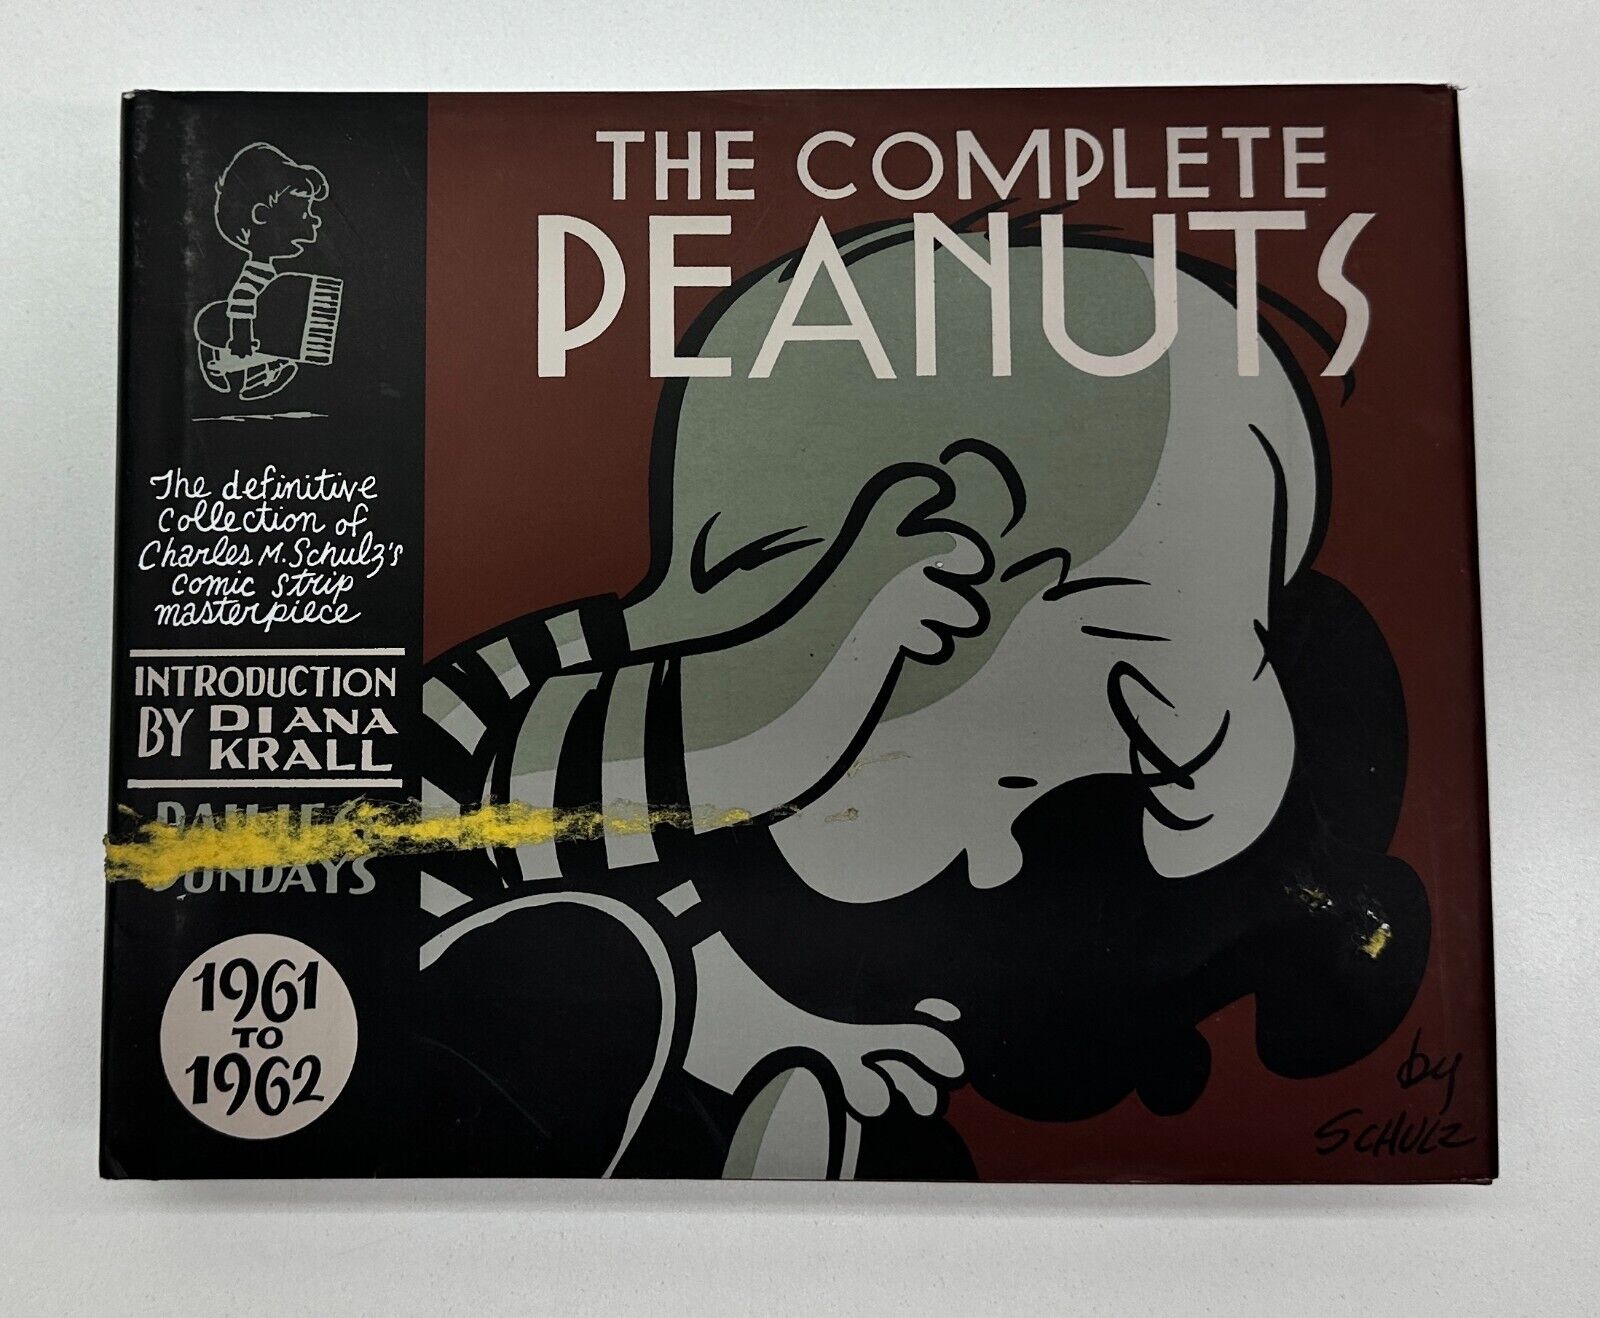 The Complete Peanuts 1961-1962: Vol. 6 Hardcover Edition Pre-Owned #69A